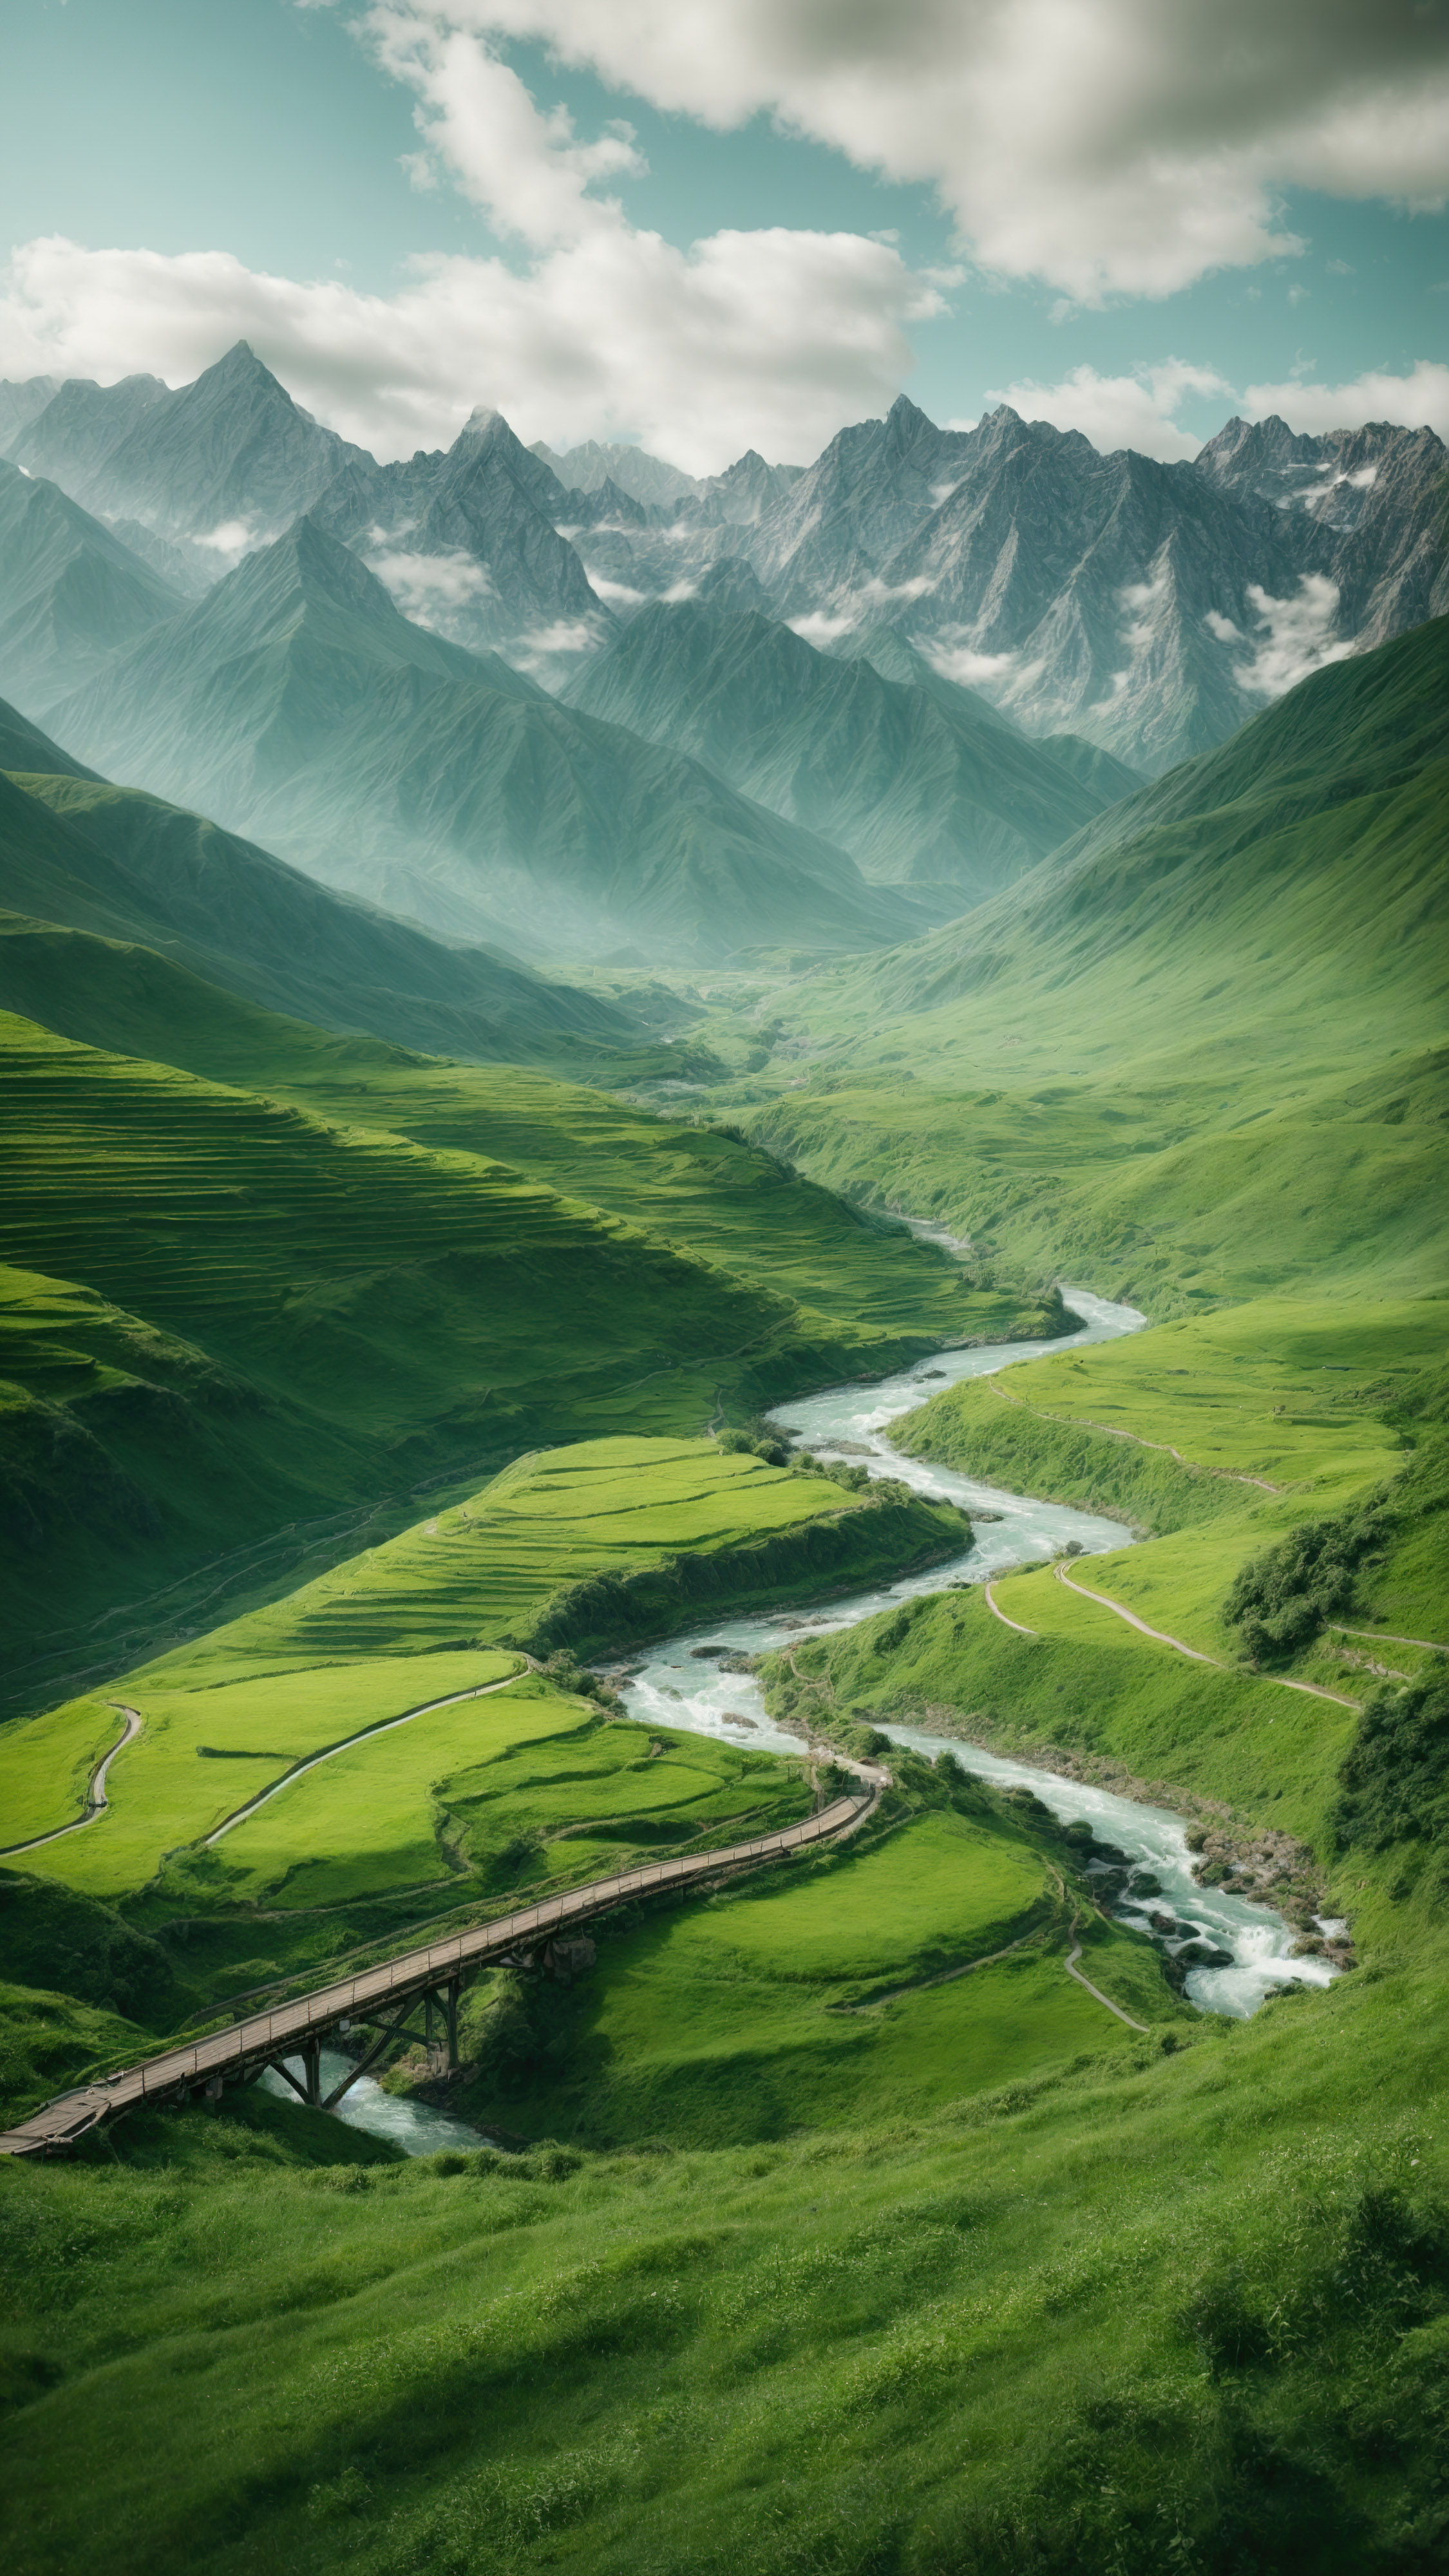 Delight in the tranquility of a green valley surrounded by majestic mountains, featuring a winding river and a wooden bridge, with our mountain range iPhone wallpaper.